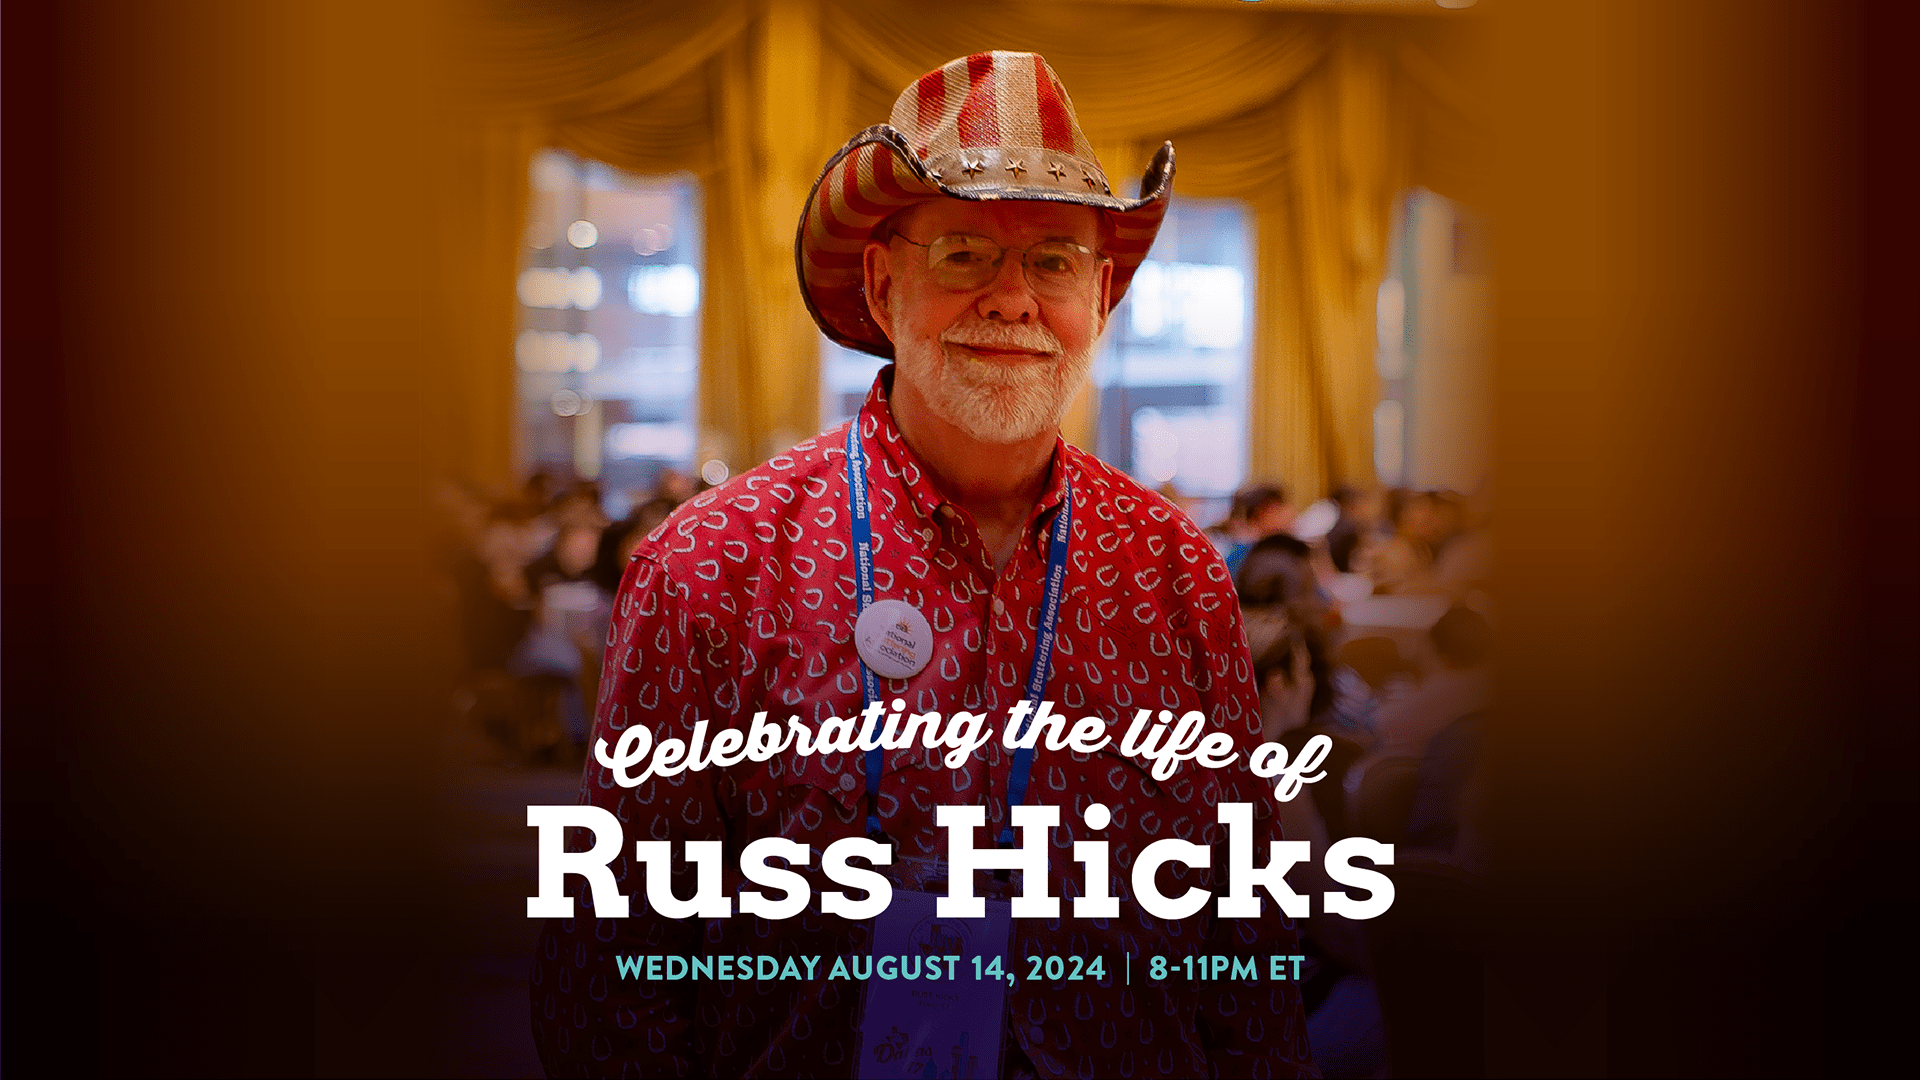 A man in a red and white patterned shirt and cowboy hat stands in a warmly lit room. Text overlay reads, "Celebrating the life of Russ Hicks," with event details: Wednesday, August 14, 2024, 8-11 PM ET.